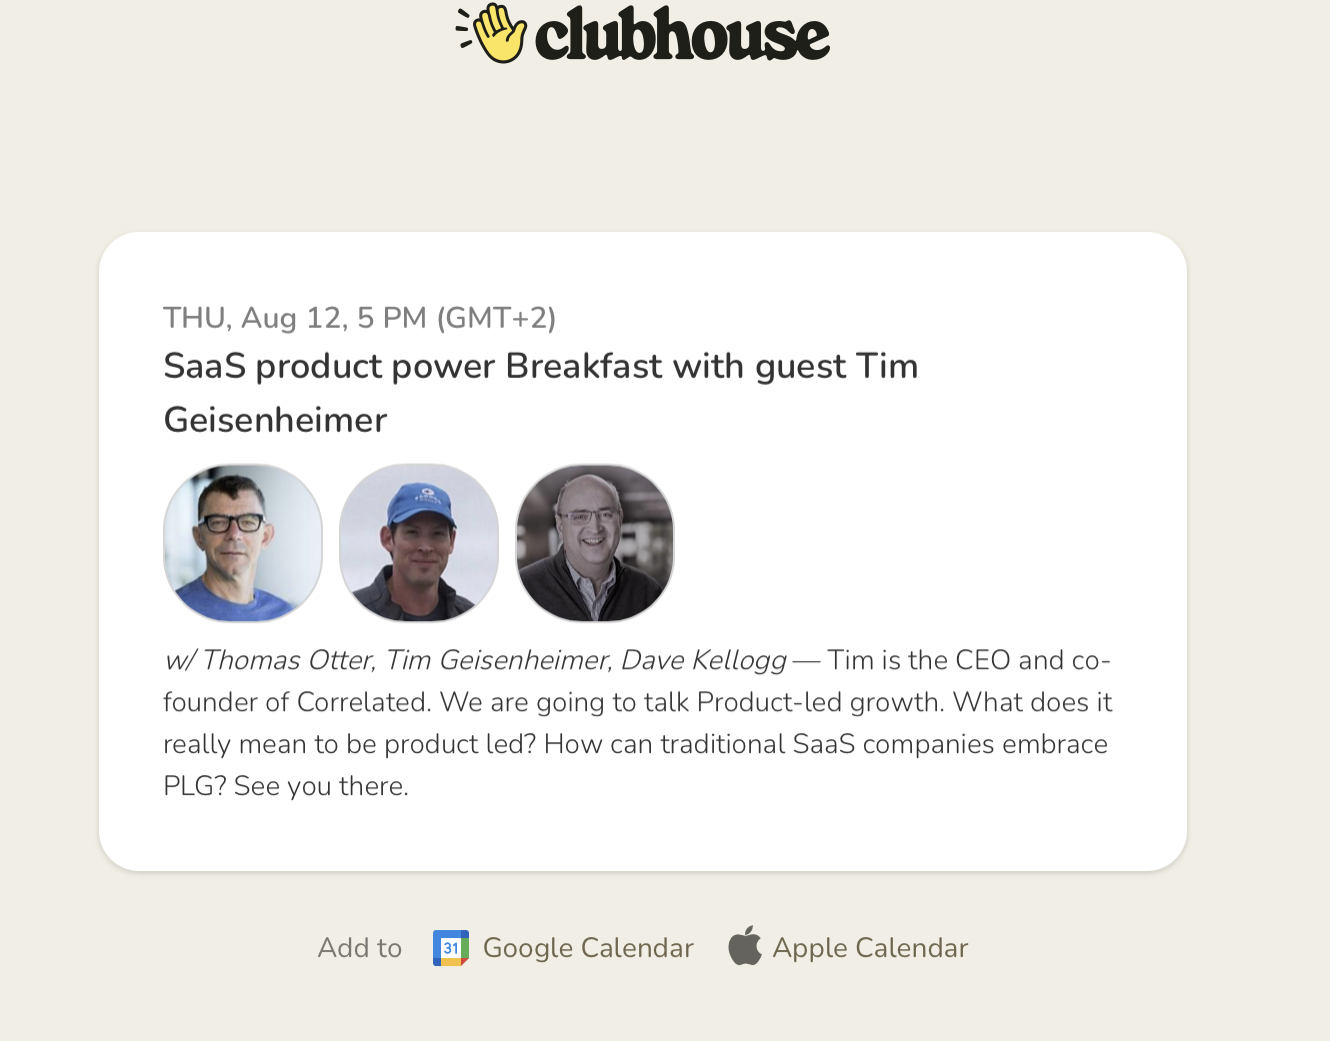 SaaS product power Breakfast with guest Tim Geisenheimer - Clubhouse 2021-08-10 17_00_46